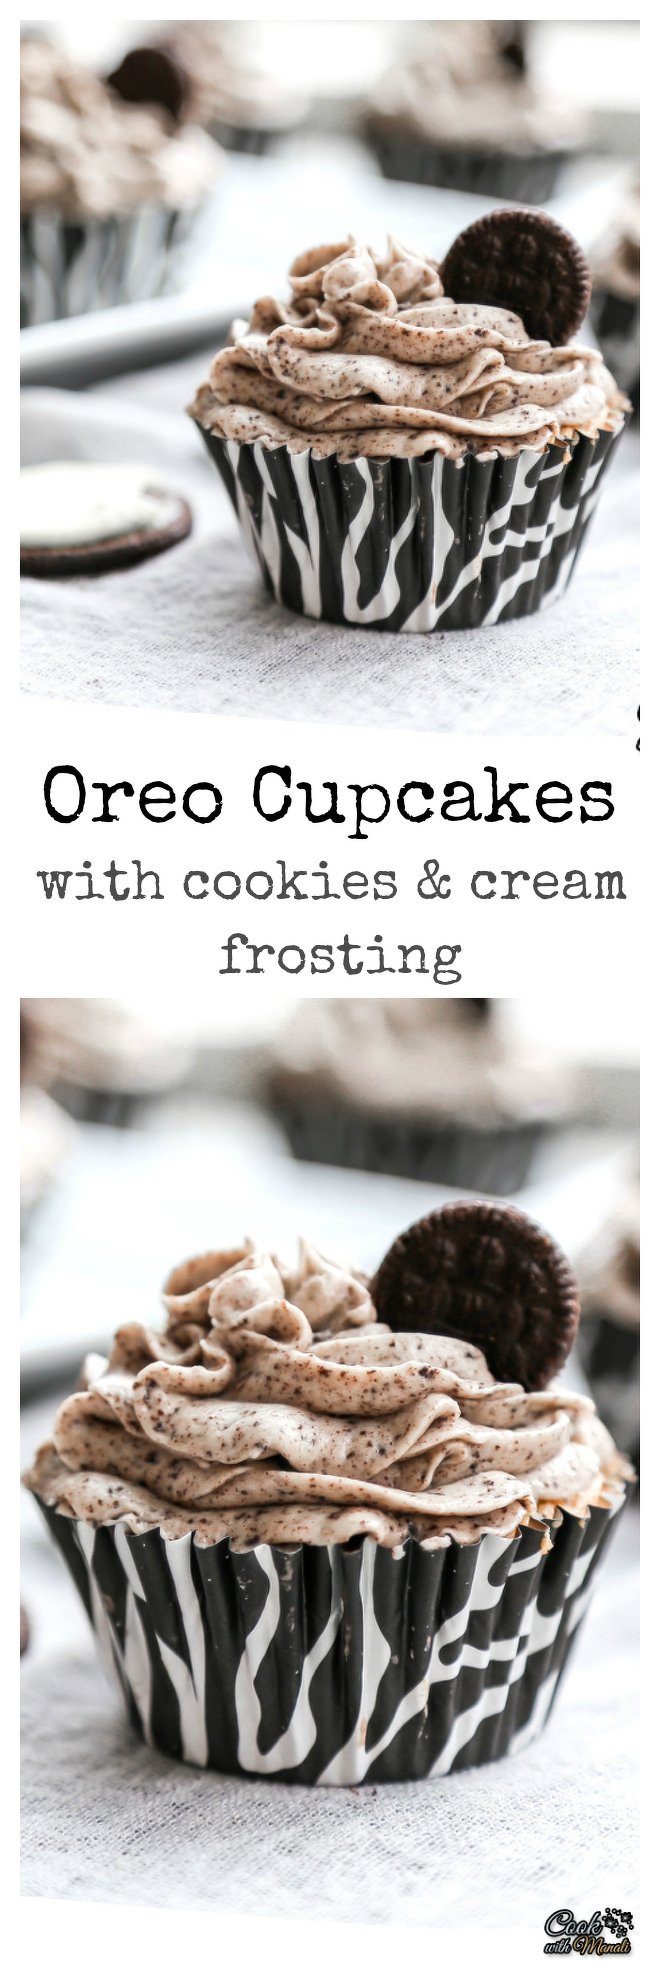 Oreo Cupcakes with Cookies & Cream Frosting Collage-nocwm